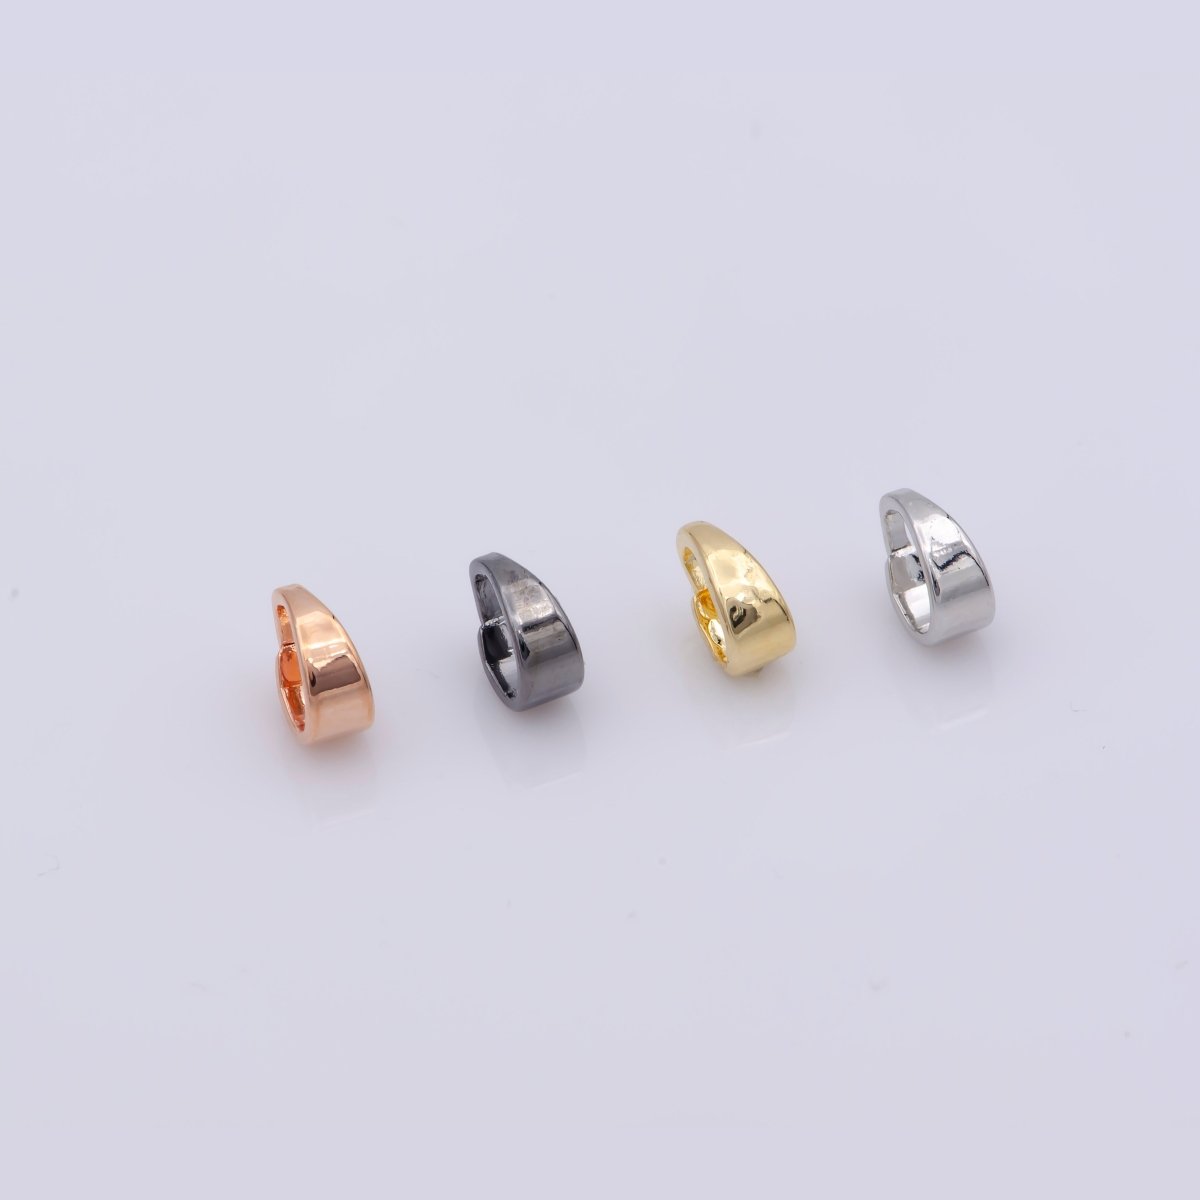 6mm, 9mm Bail For Pendant Snap-on for Pendant, Clip On Bails Bail and Necklace Jewelry Making And Wholesale Findings 14K Gold Filled K-884 to K-891 - DLUXCA